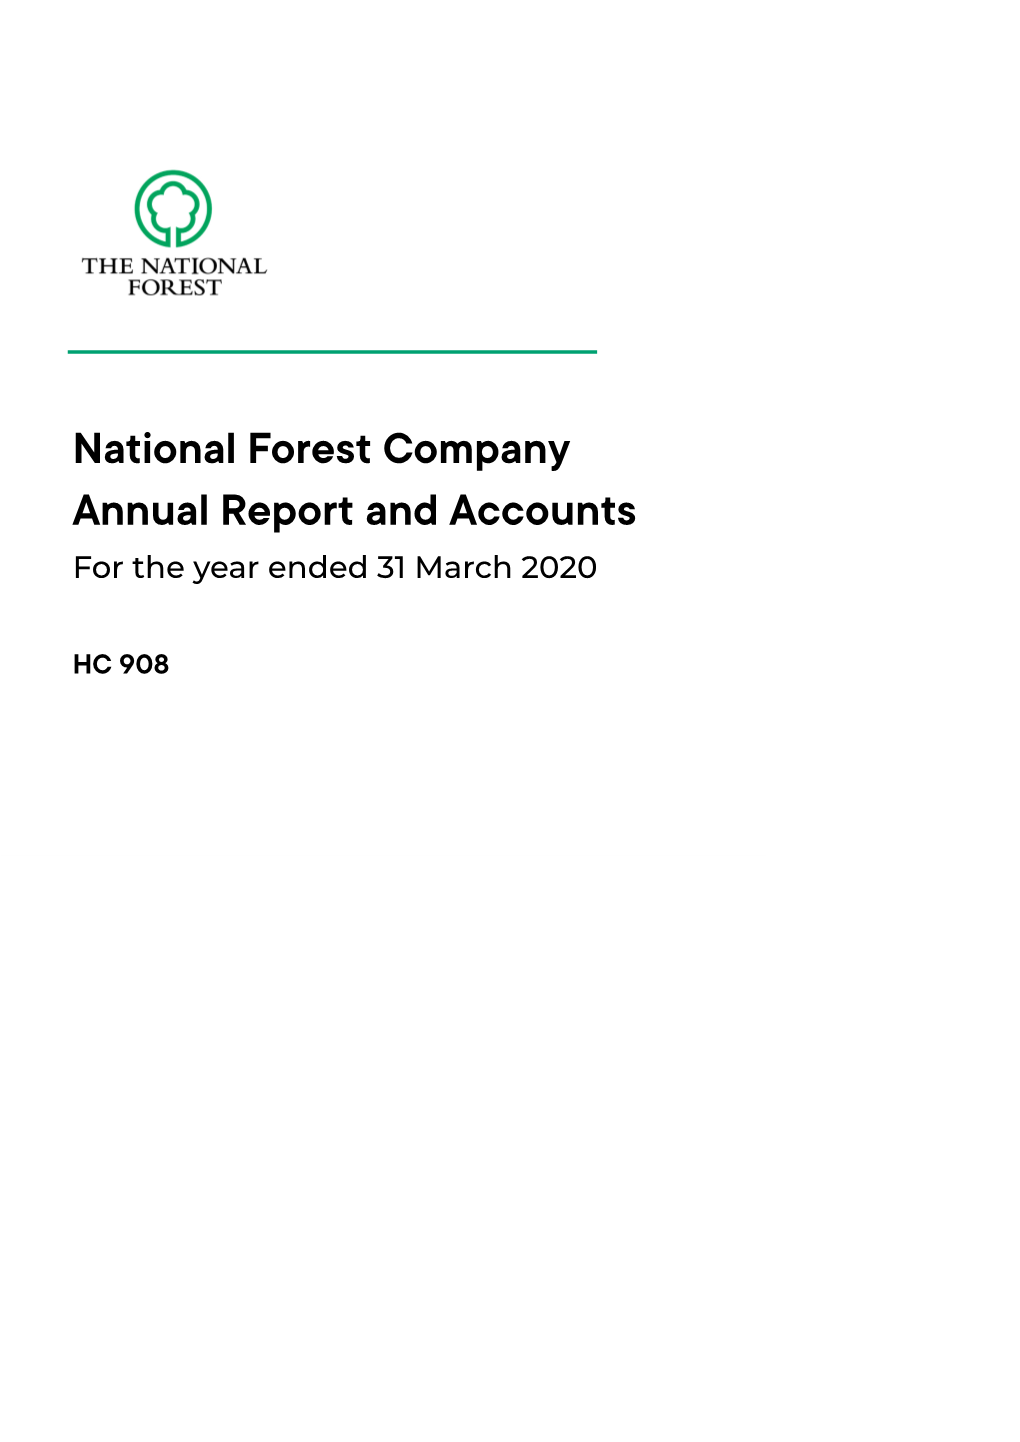 National Forest Company Annual Report and Accounts for the Year Ended 31 March 2020